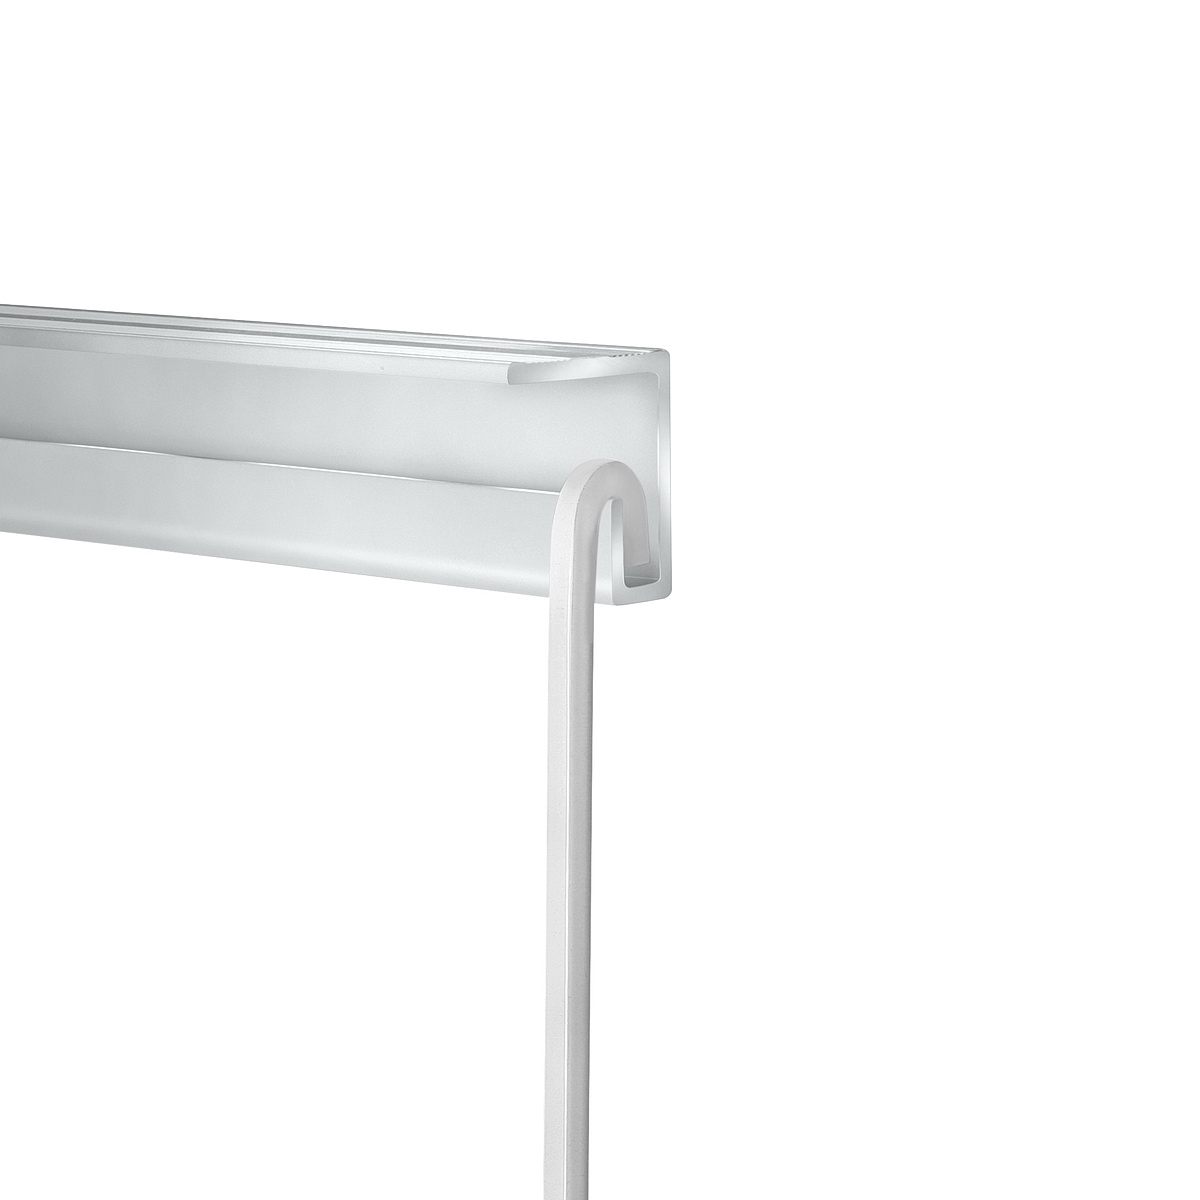 Ceiling Rail System, Clear Anodized Finish